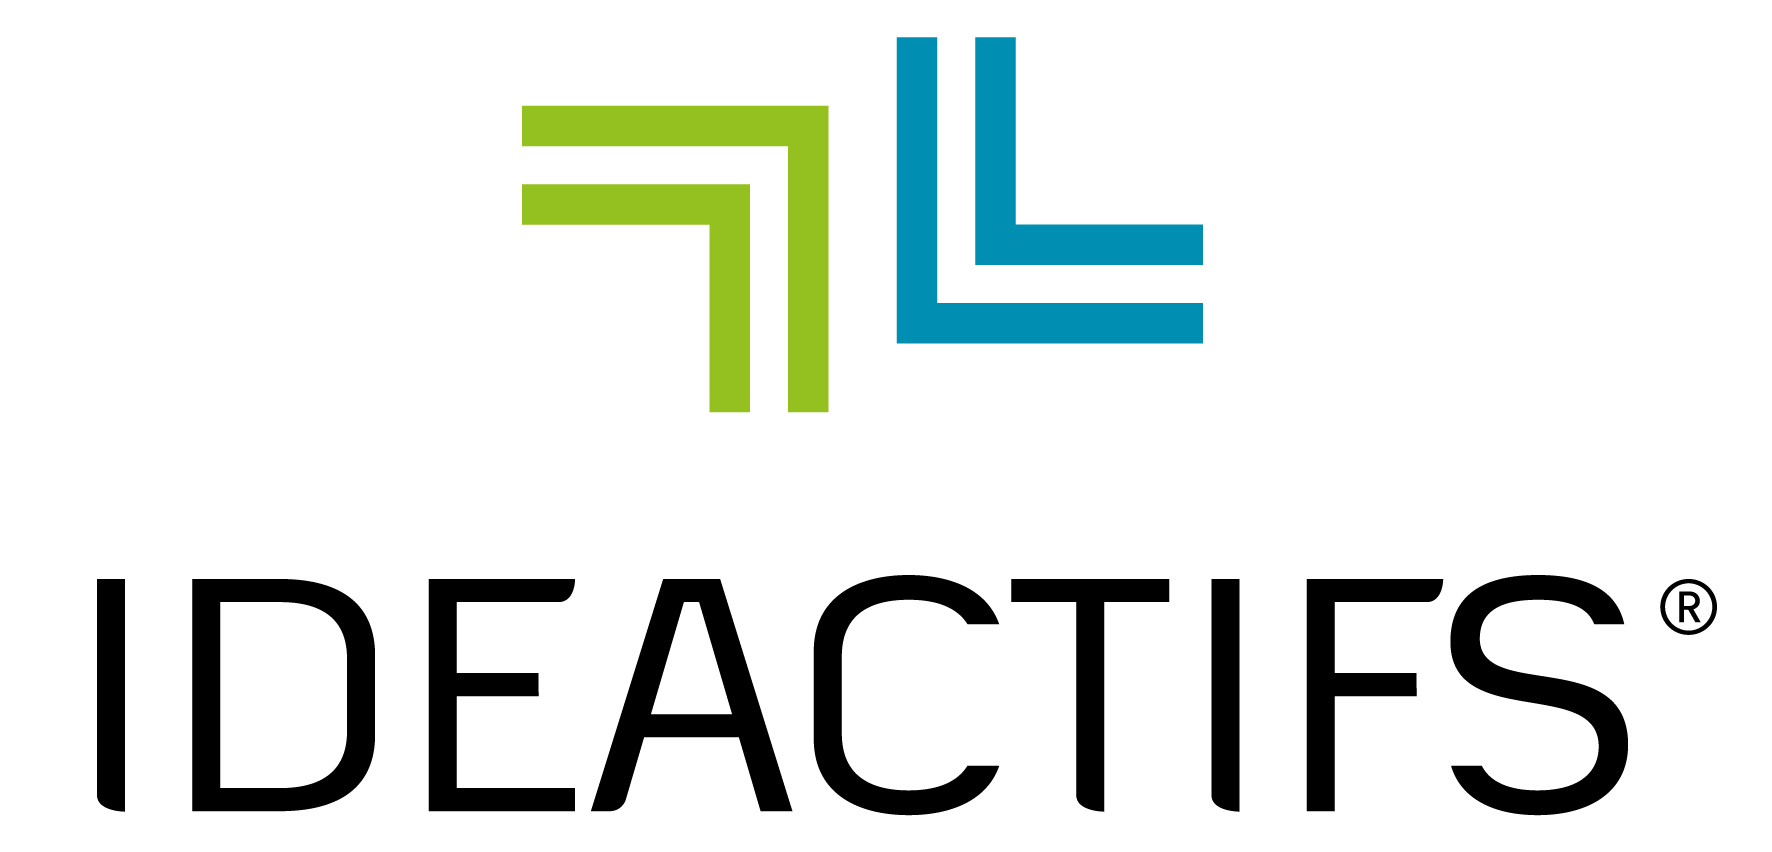 Ideactifs provides health ingredients with high added value to the food supplement and functional food markets.